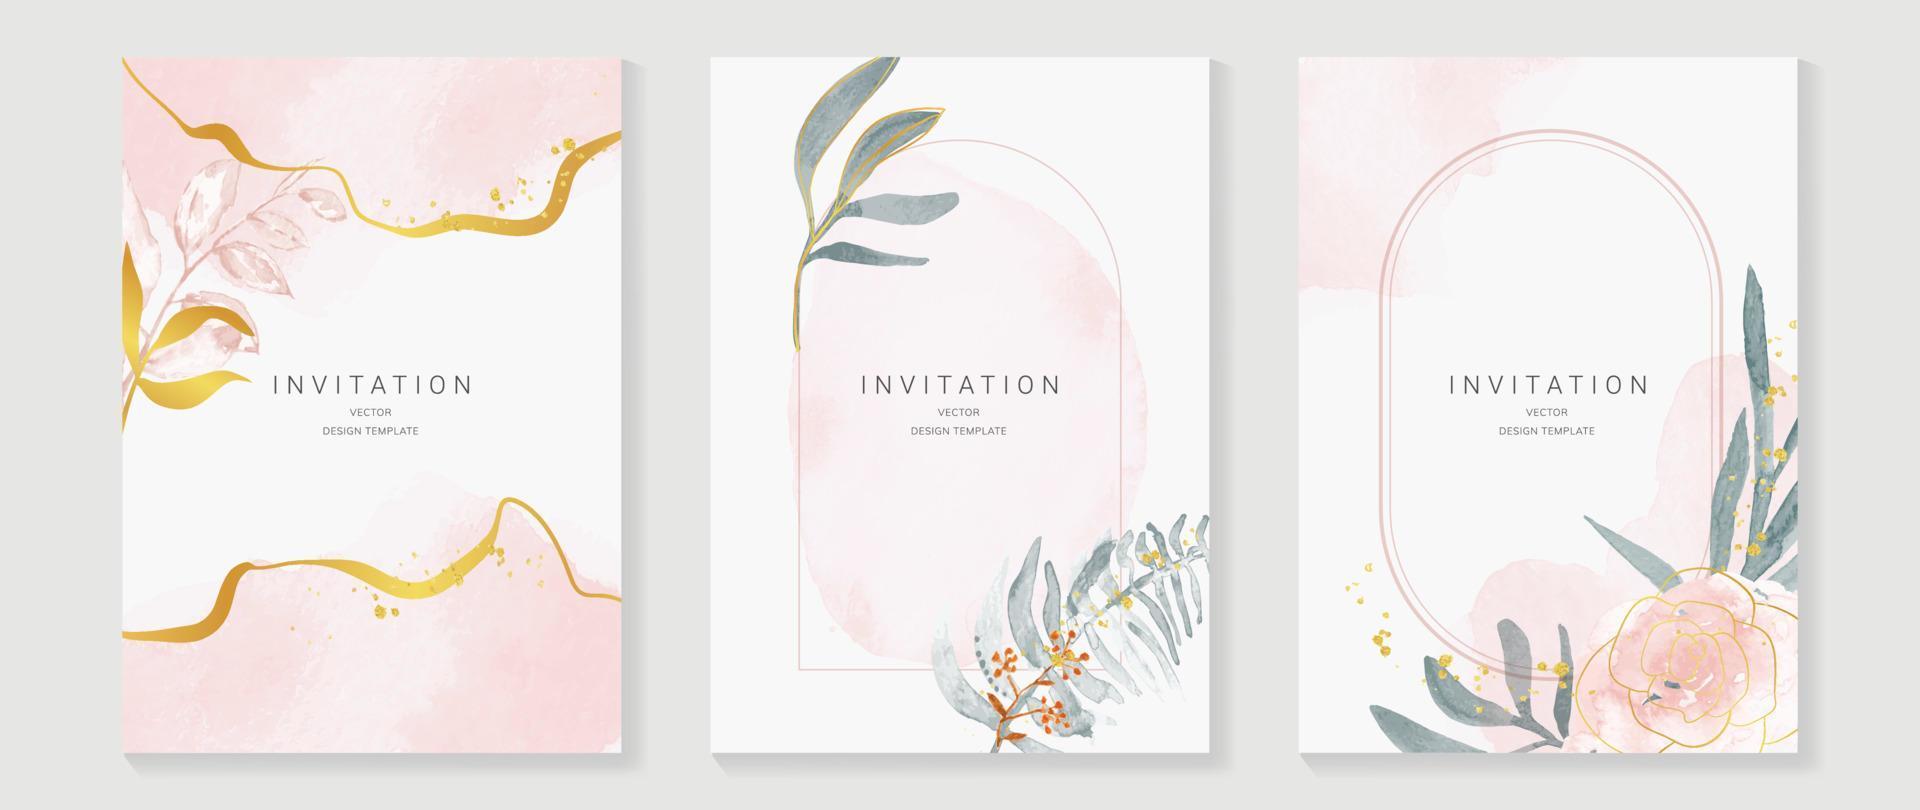 Luxury wedding invitation card background vector. Elegant watercolor texture in pink flower, gold line, gold border. Spring floral design illustration for wedding and cover template, banner, invite. vector